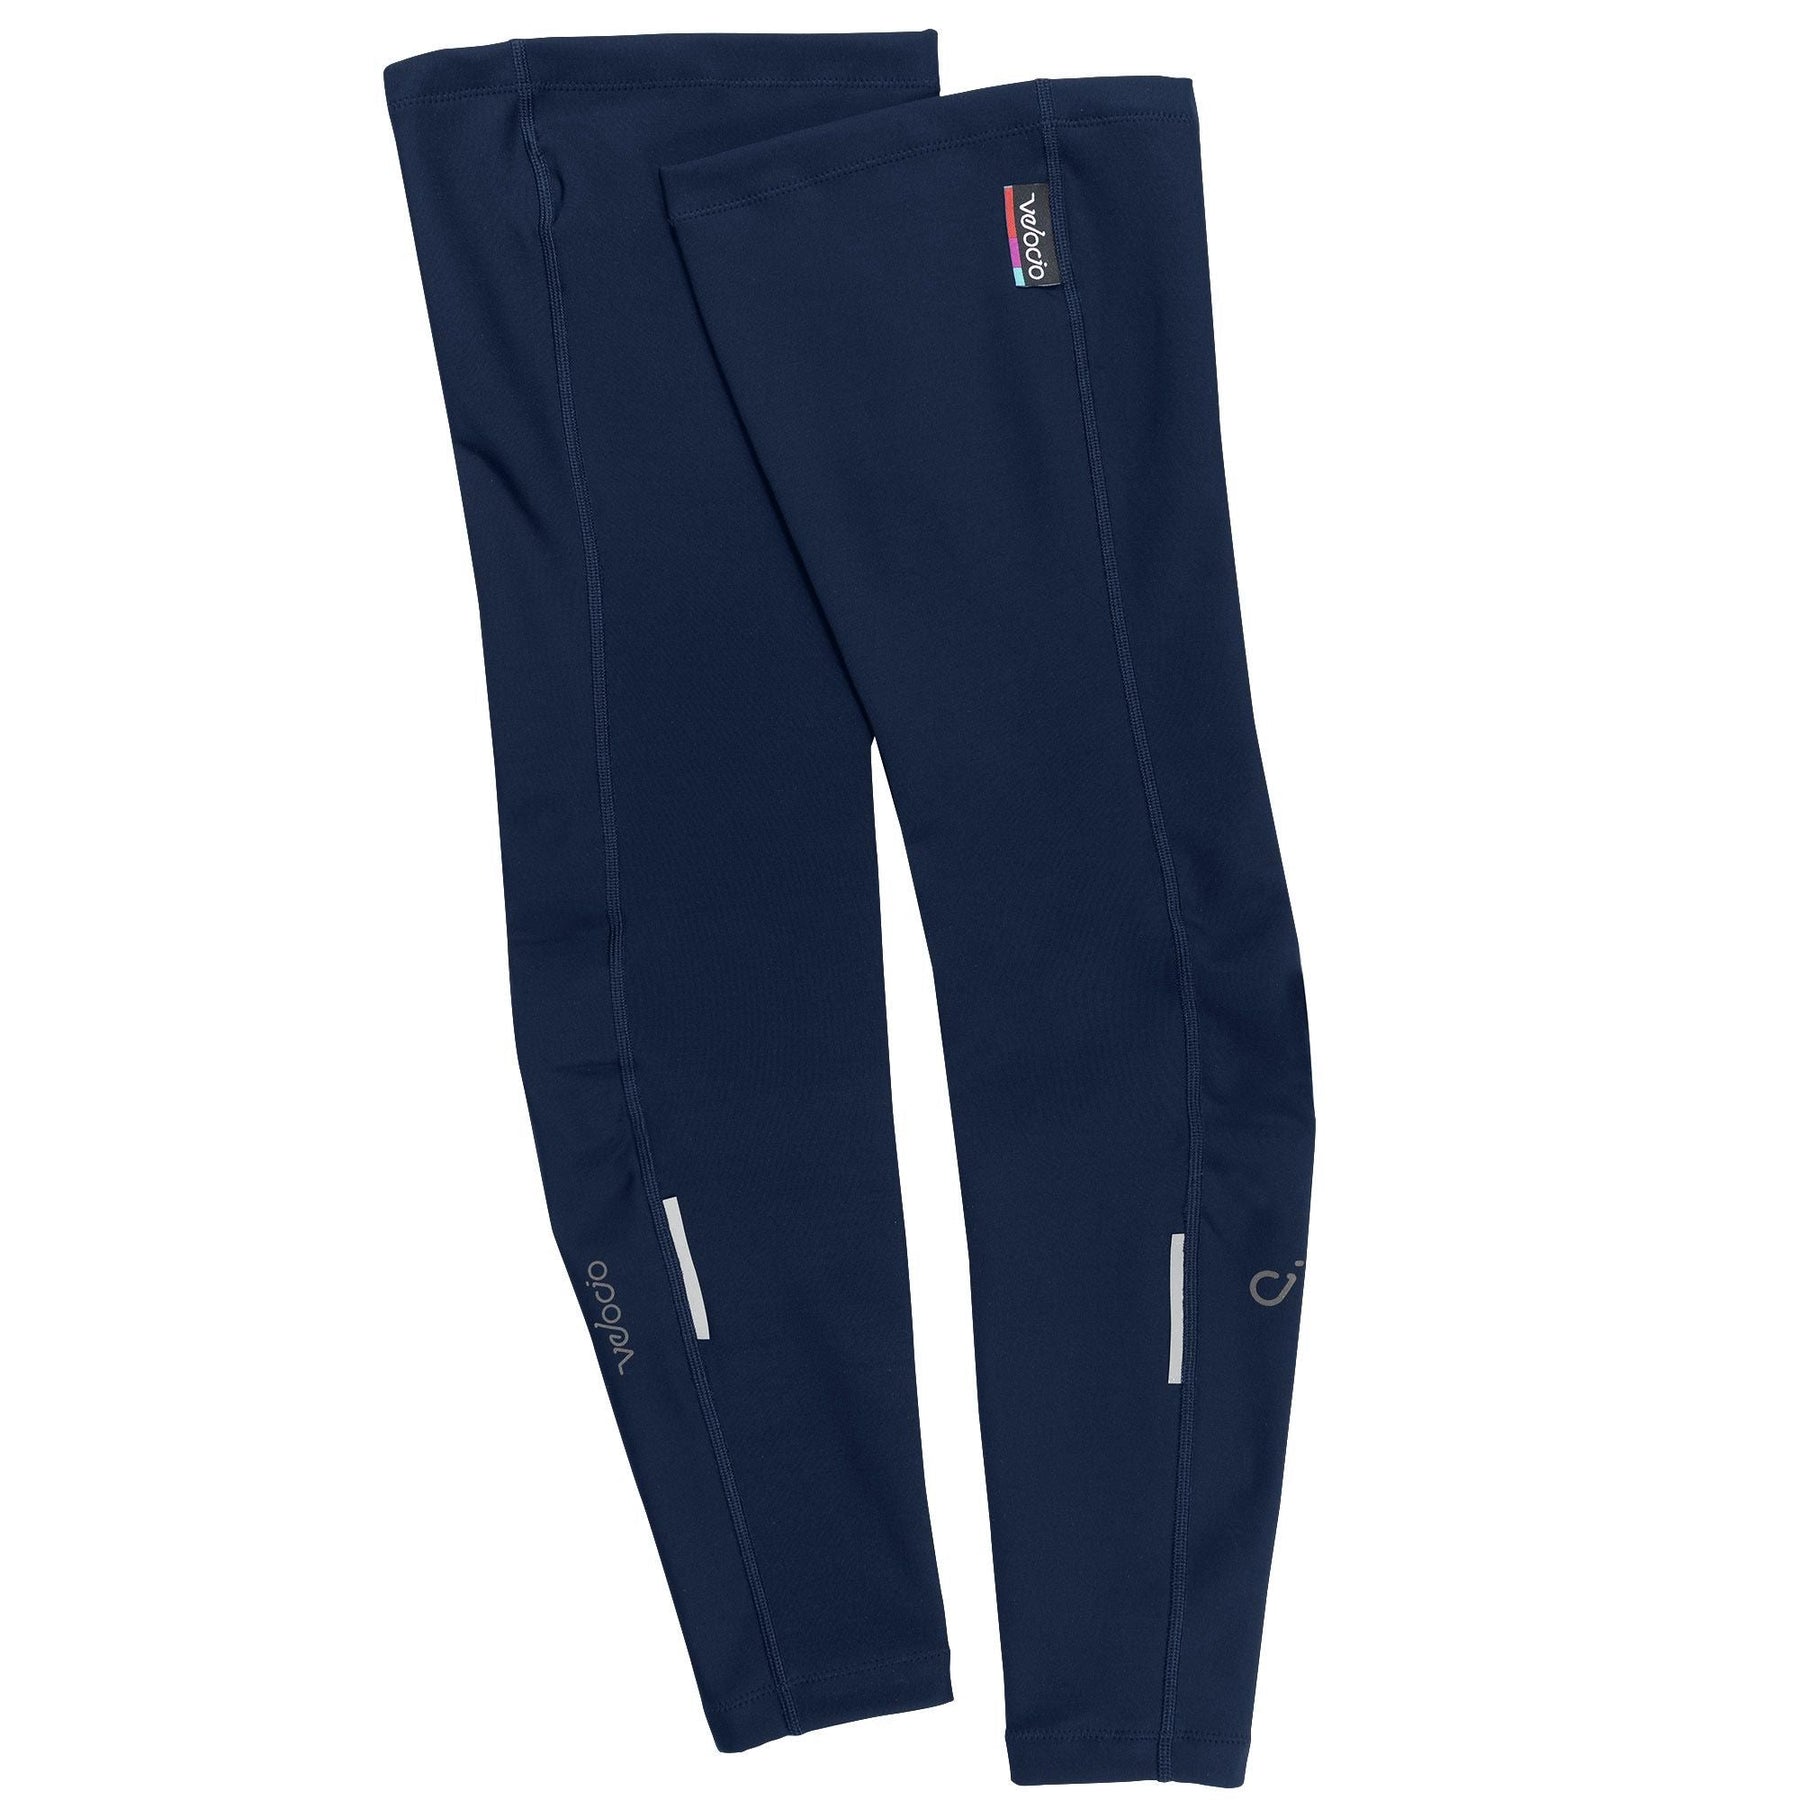 Solid Navy Thermo-fit Leg Warmers, Running Gear